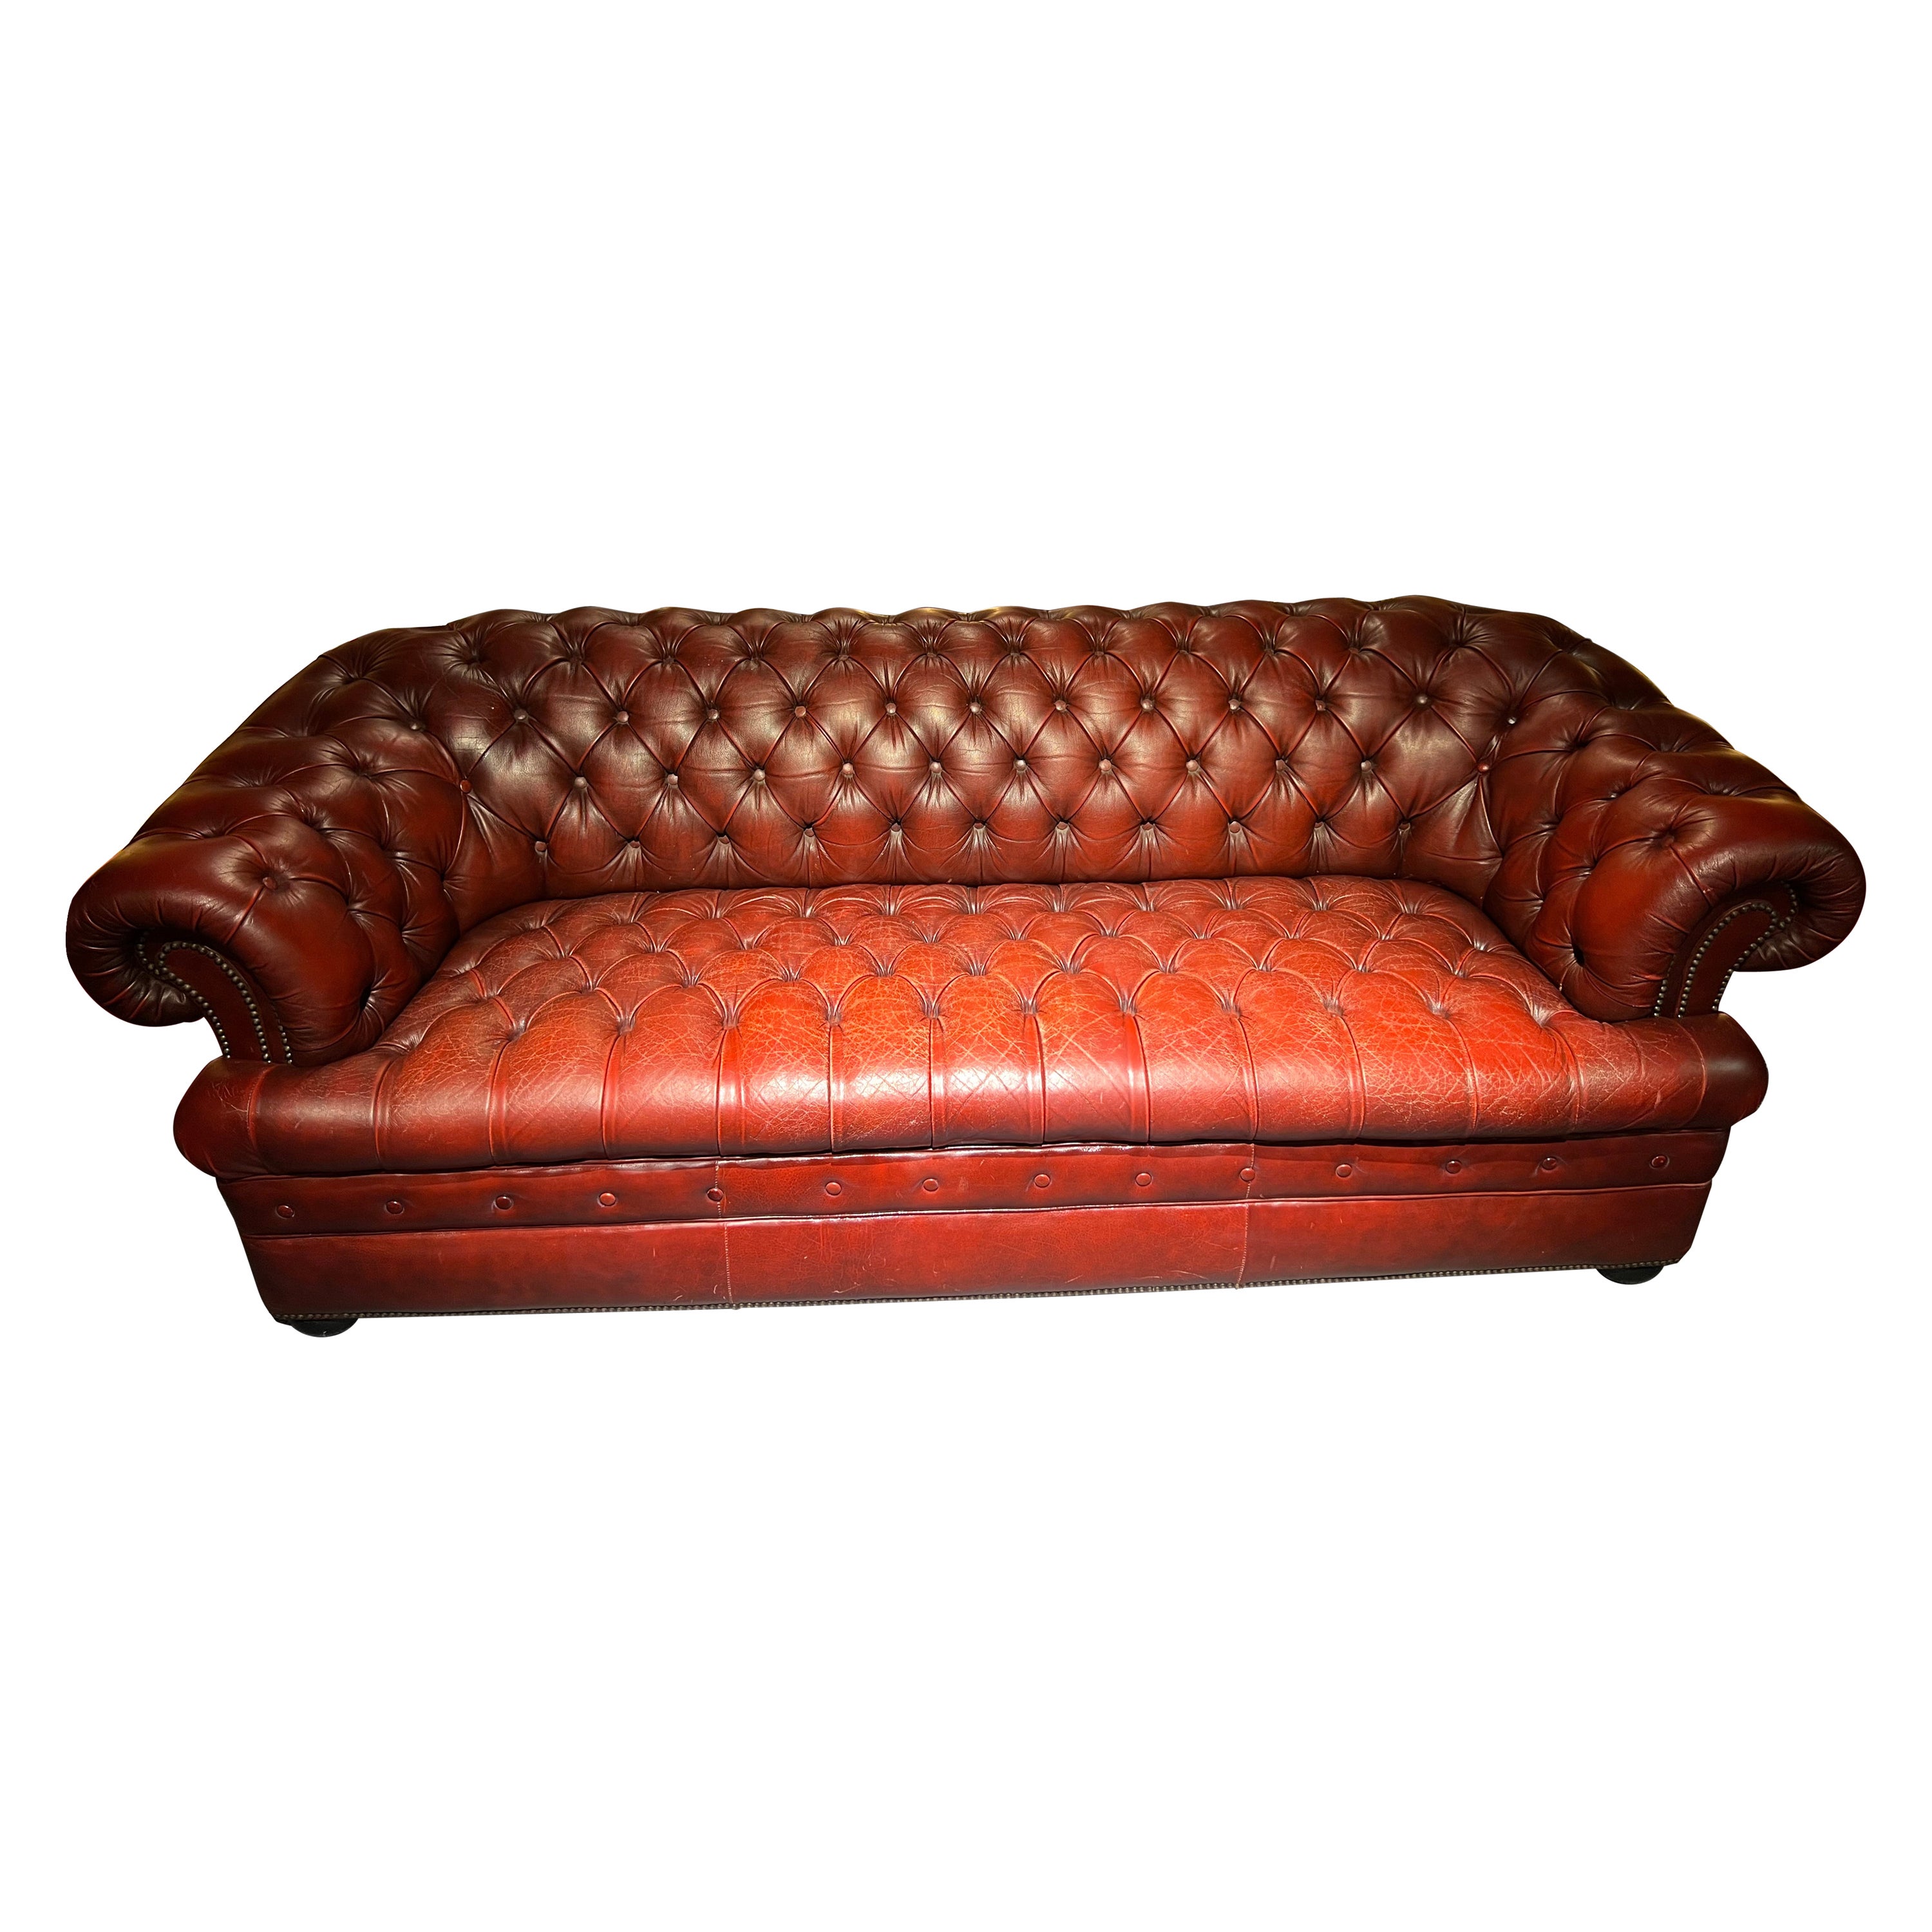 Stunning Vintage English Red Leather Chesterfield 3 Seater Sofa For Sale